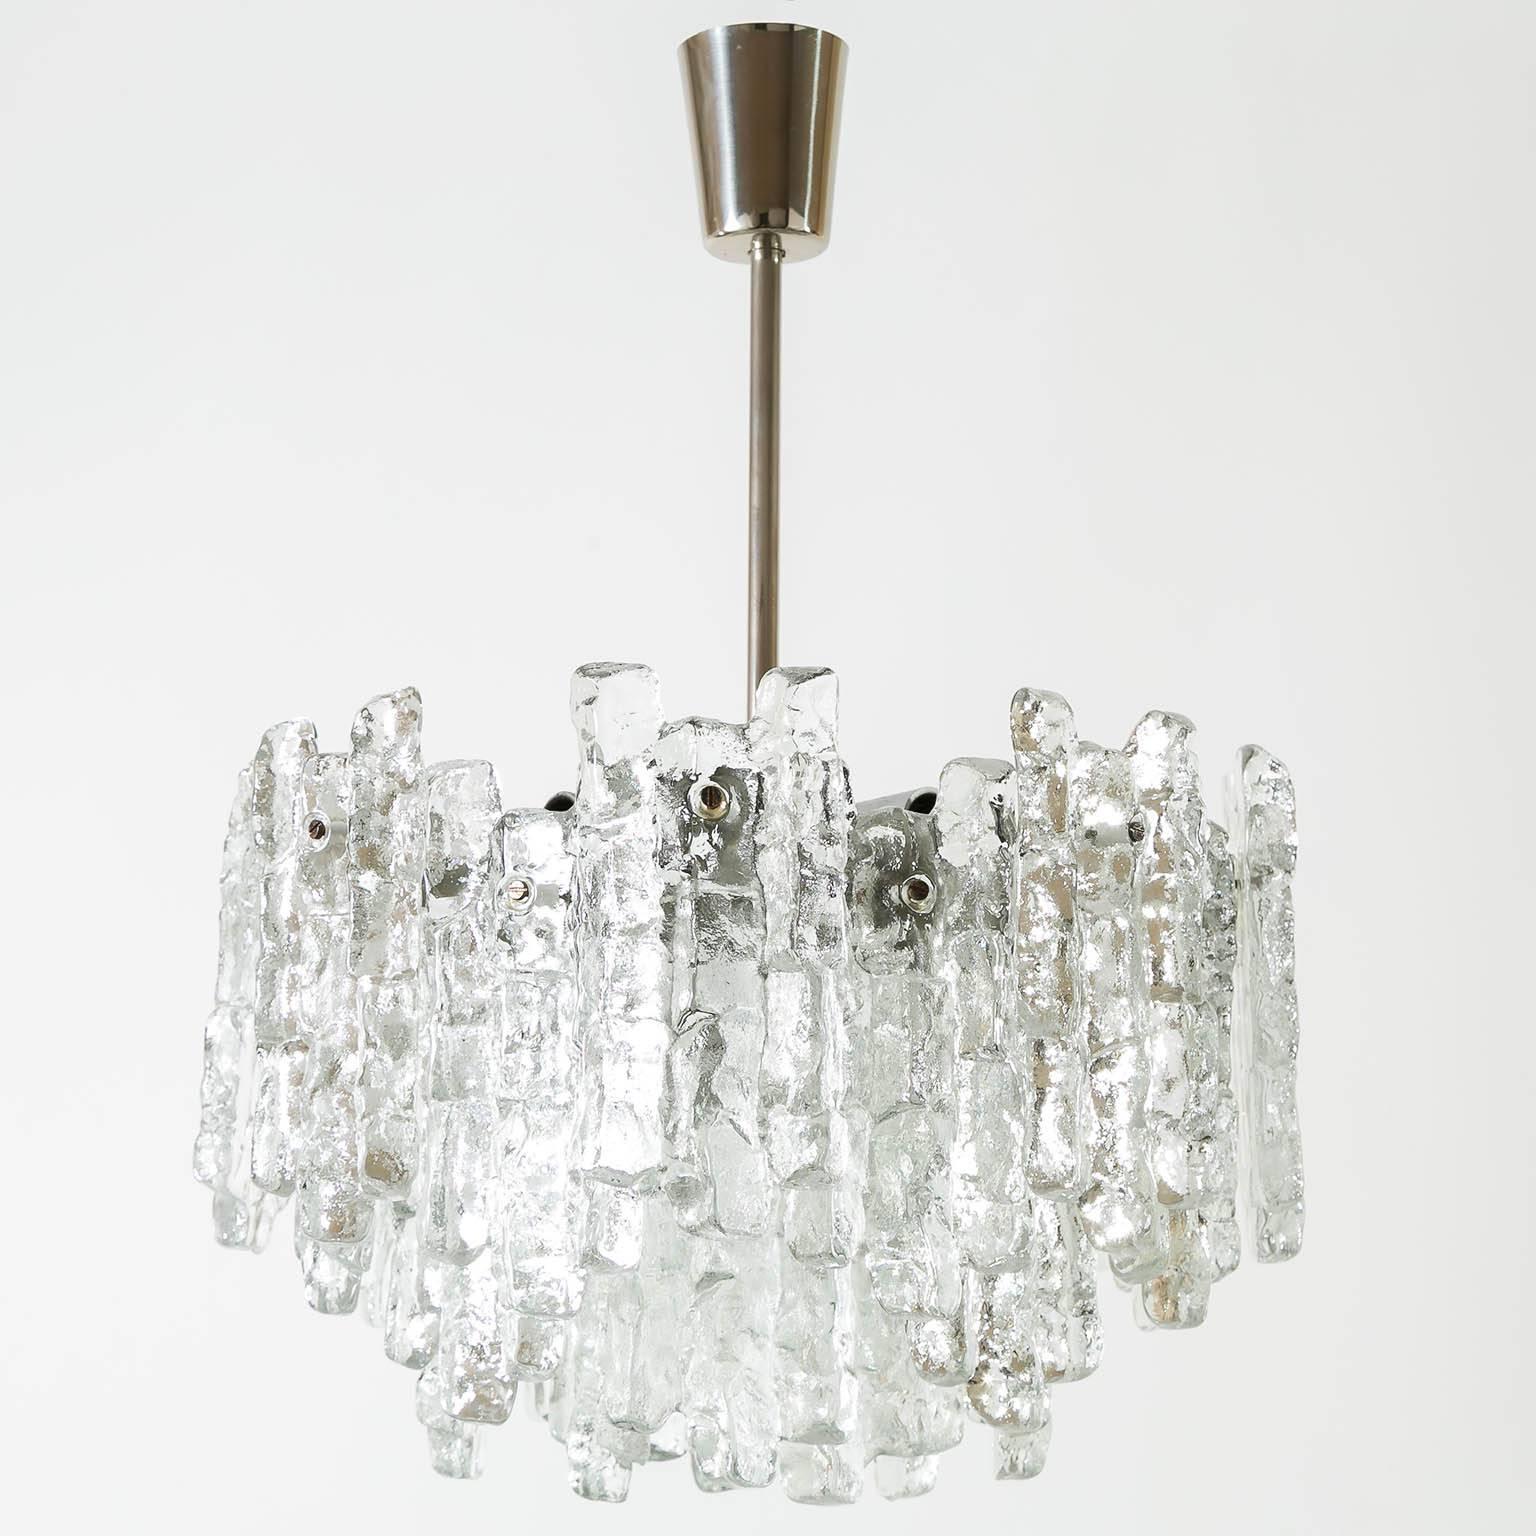 Two beautiful ice glass light fixtures by Kalmar, Austria, manufactured in Mid-Century, circa 1970 (1960s-1970s). Each chandelier is made of 28 massive ice blocks which are mounted on a silver painted metal frame. The stem and canopy are made of